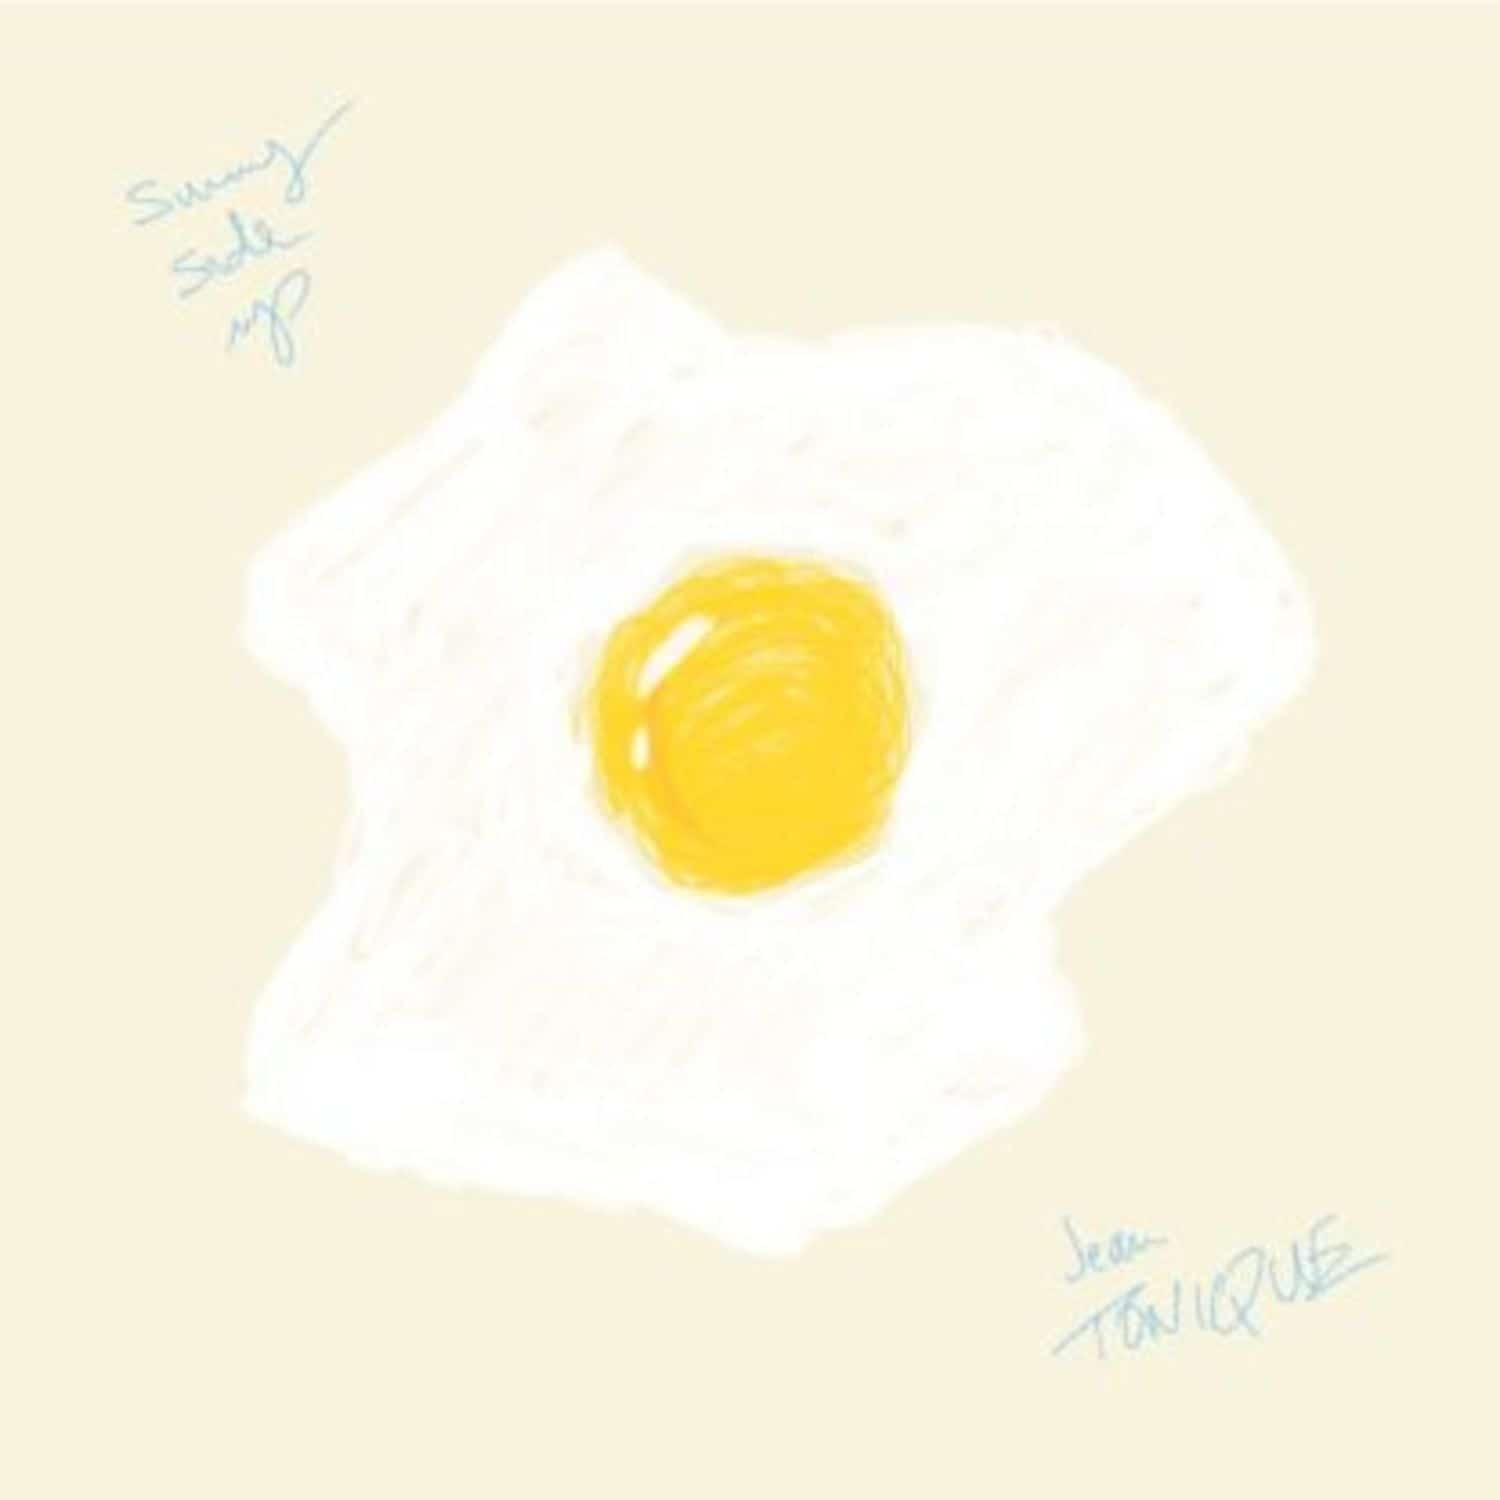 Jean Tonique - SUNNY SIDE UP 